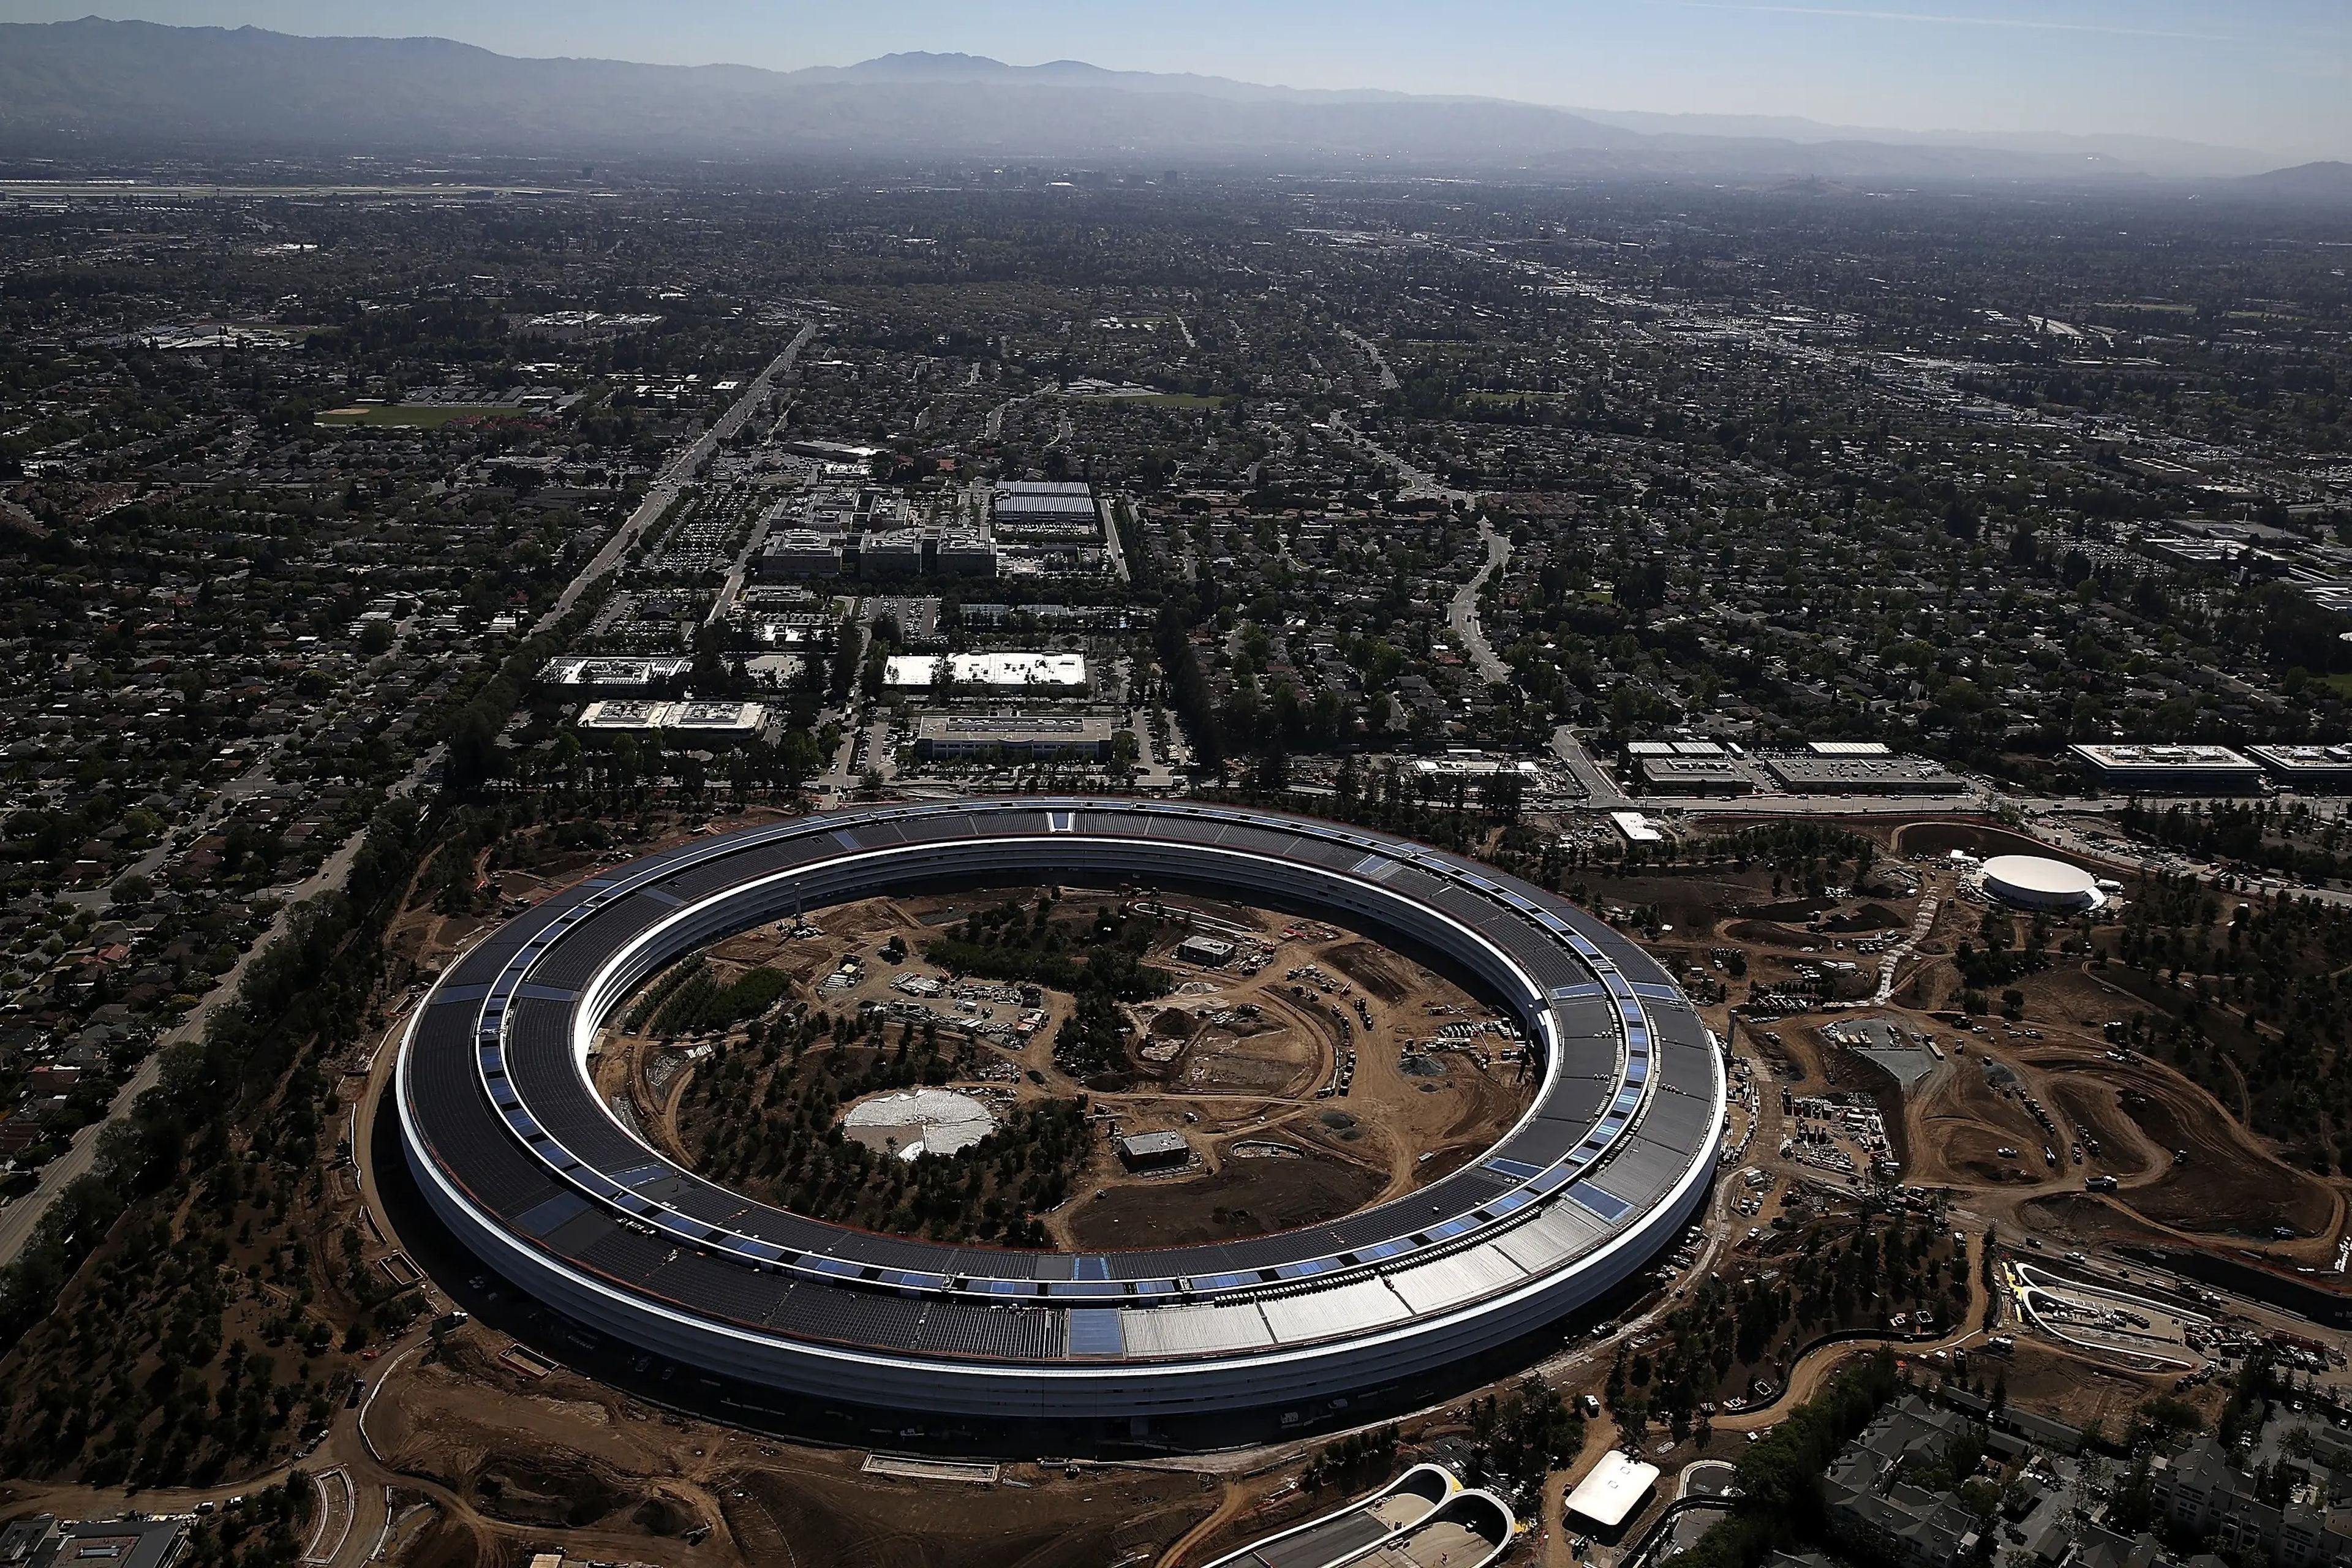 Apple's headquarters in Cupertino that has a circular design like a spaceship